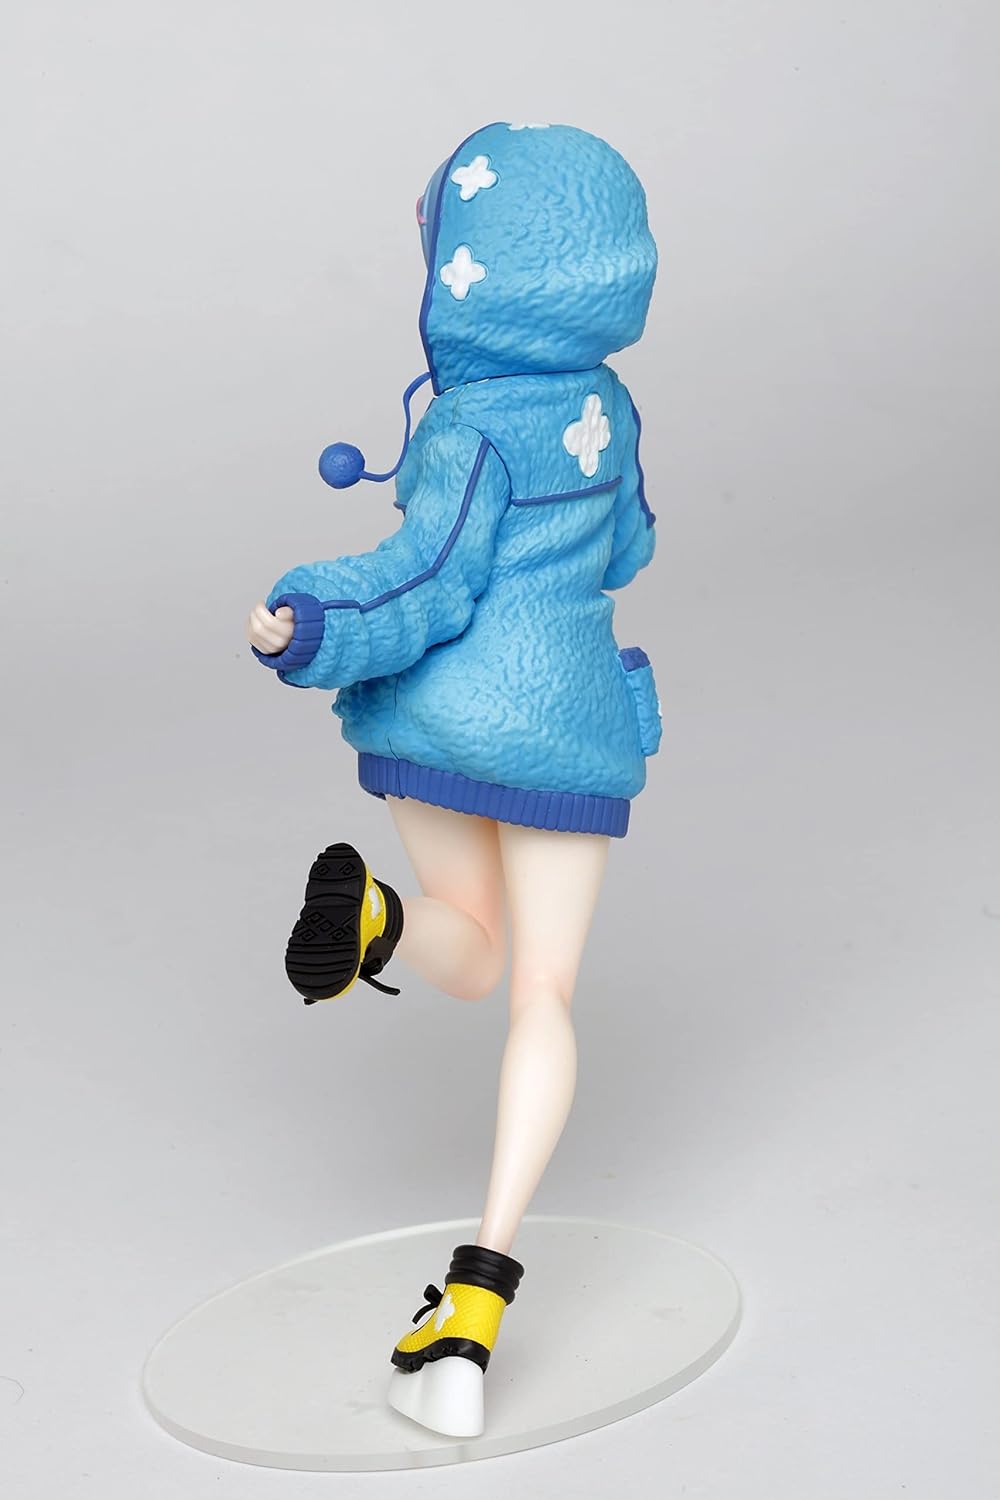 Re:Zero - Starting Life in Another World - Precious Figures - Rem - Fluffy Hoodie Ver. | animota